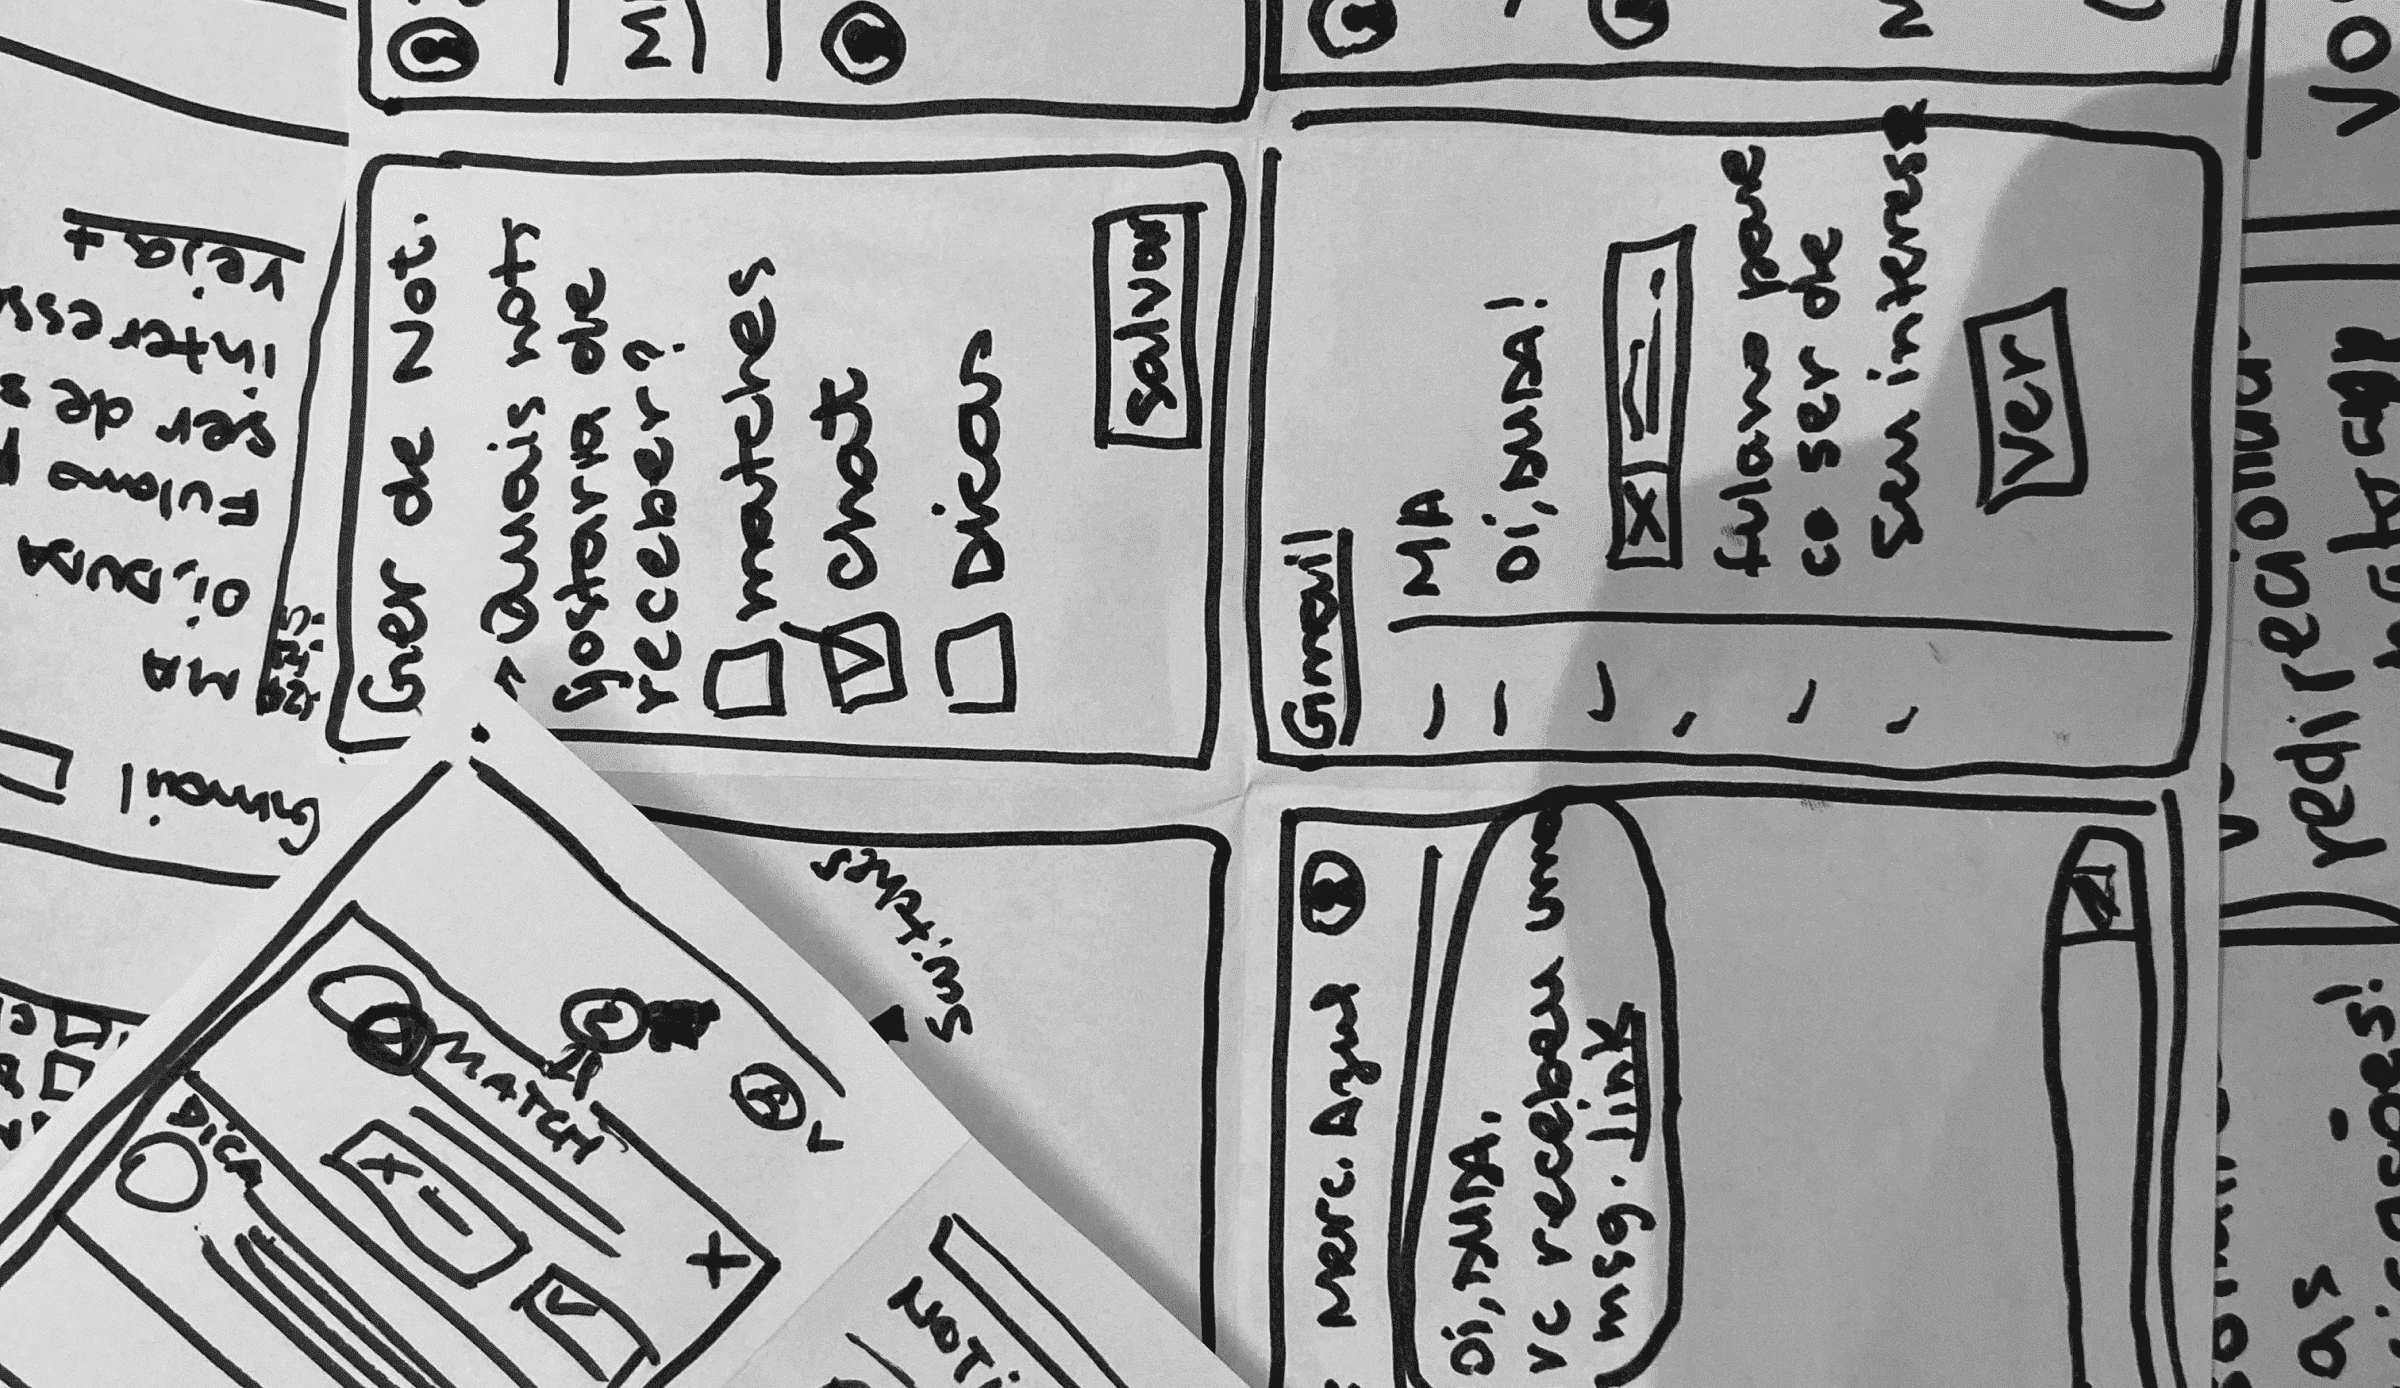 Sketch from the Entity's Design Sprint